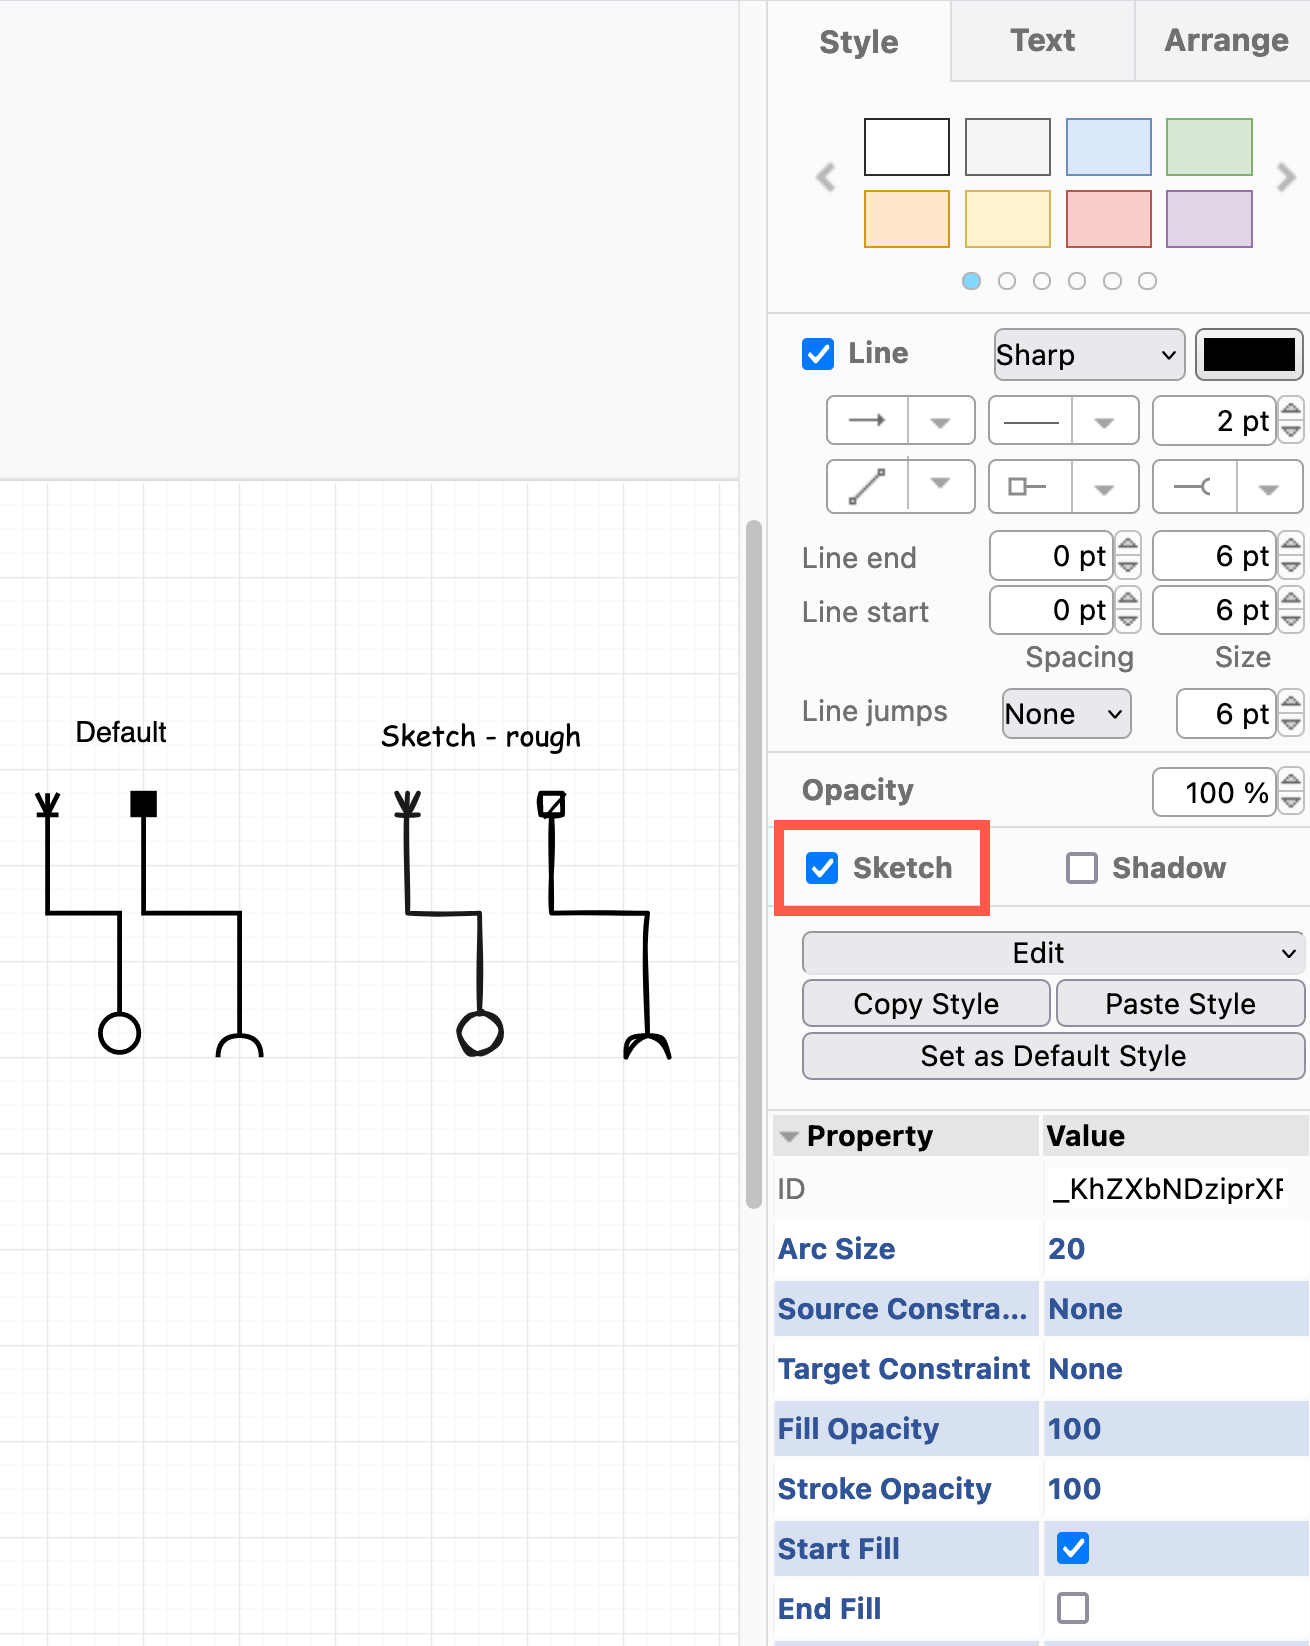 For hand-drawn connectors and arrow heads, enable the Sketch style in the Style tab of the format panel